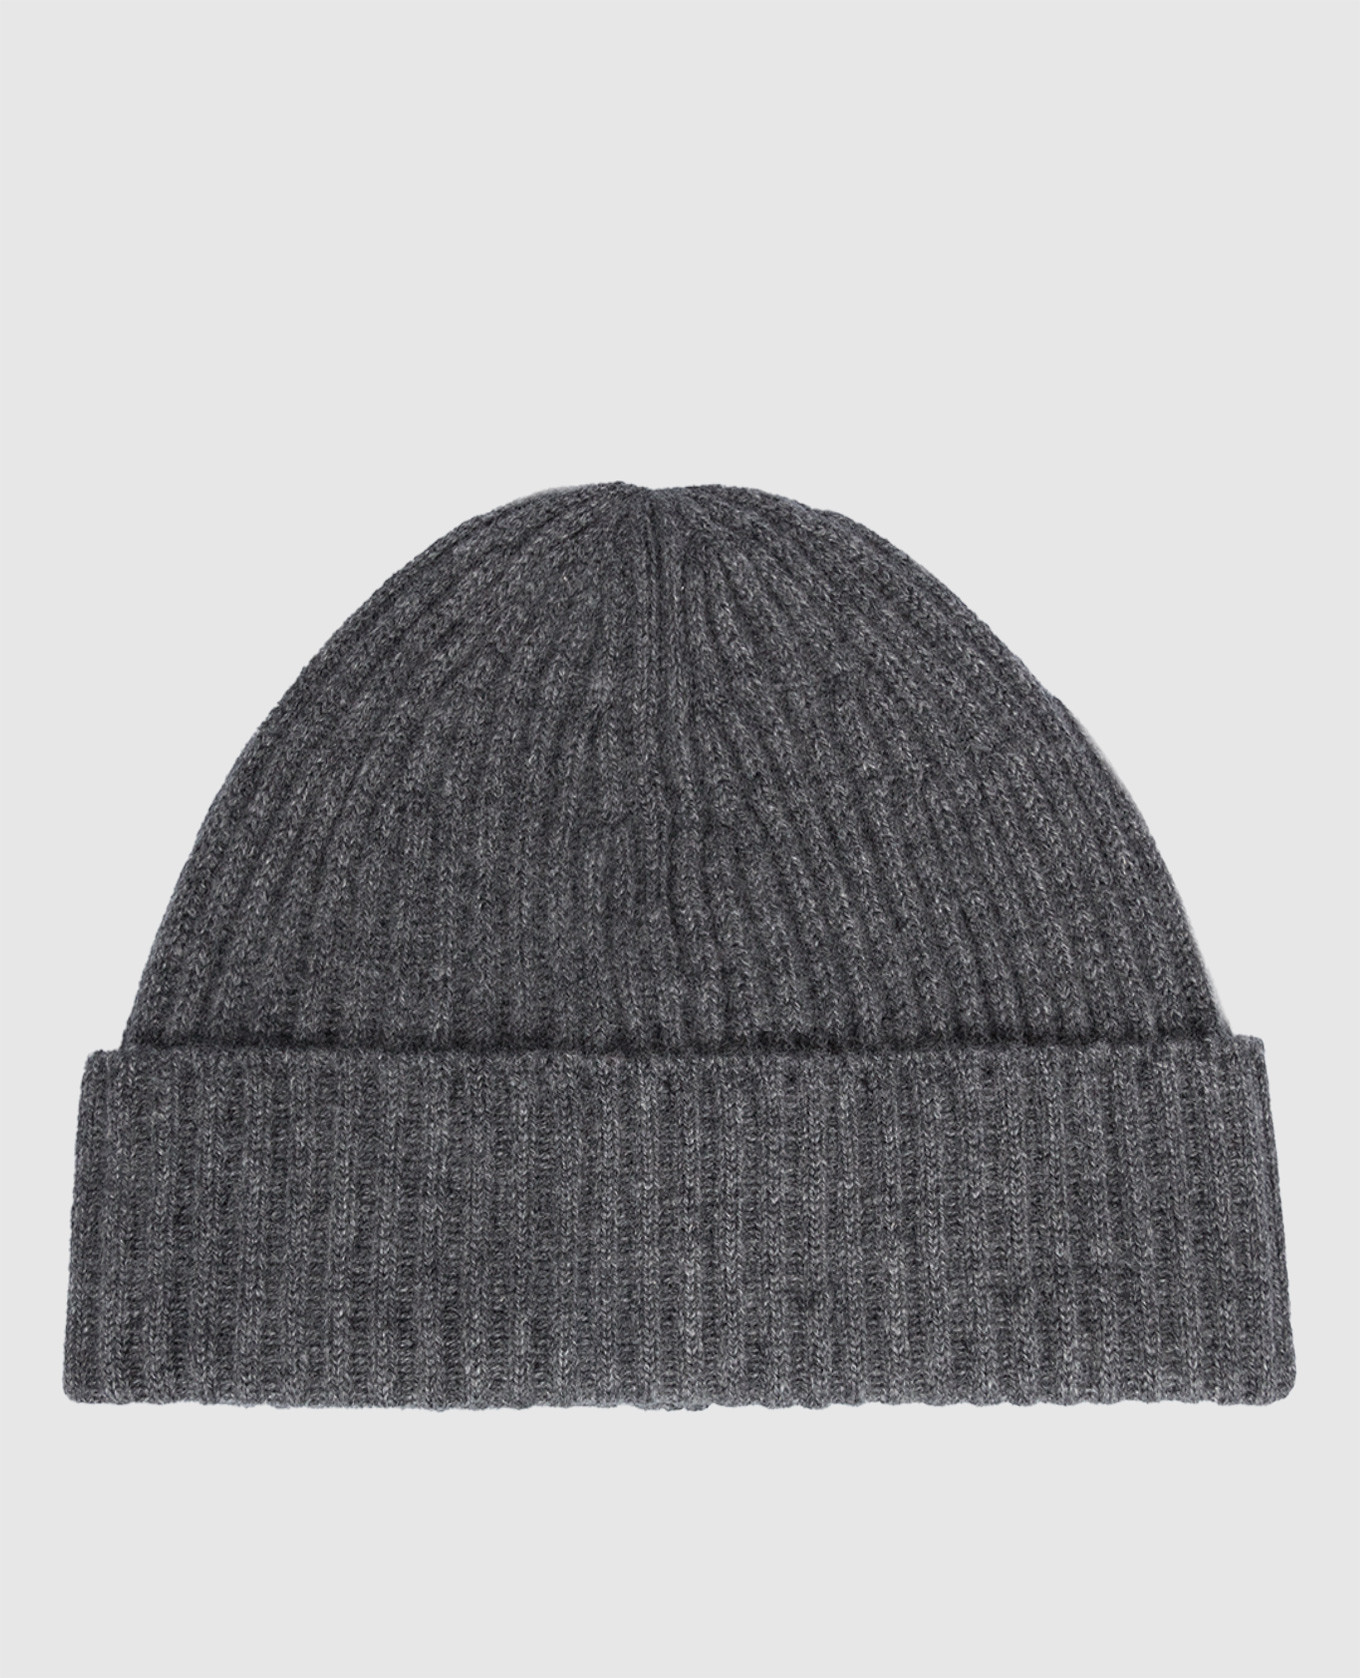 Charcoal ribbed cashmere hat